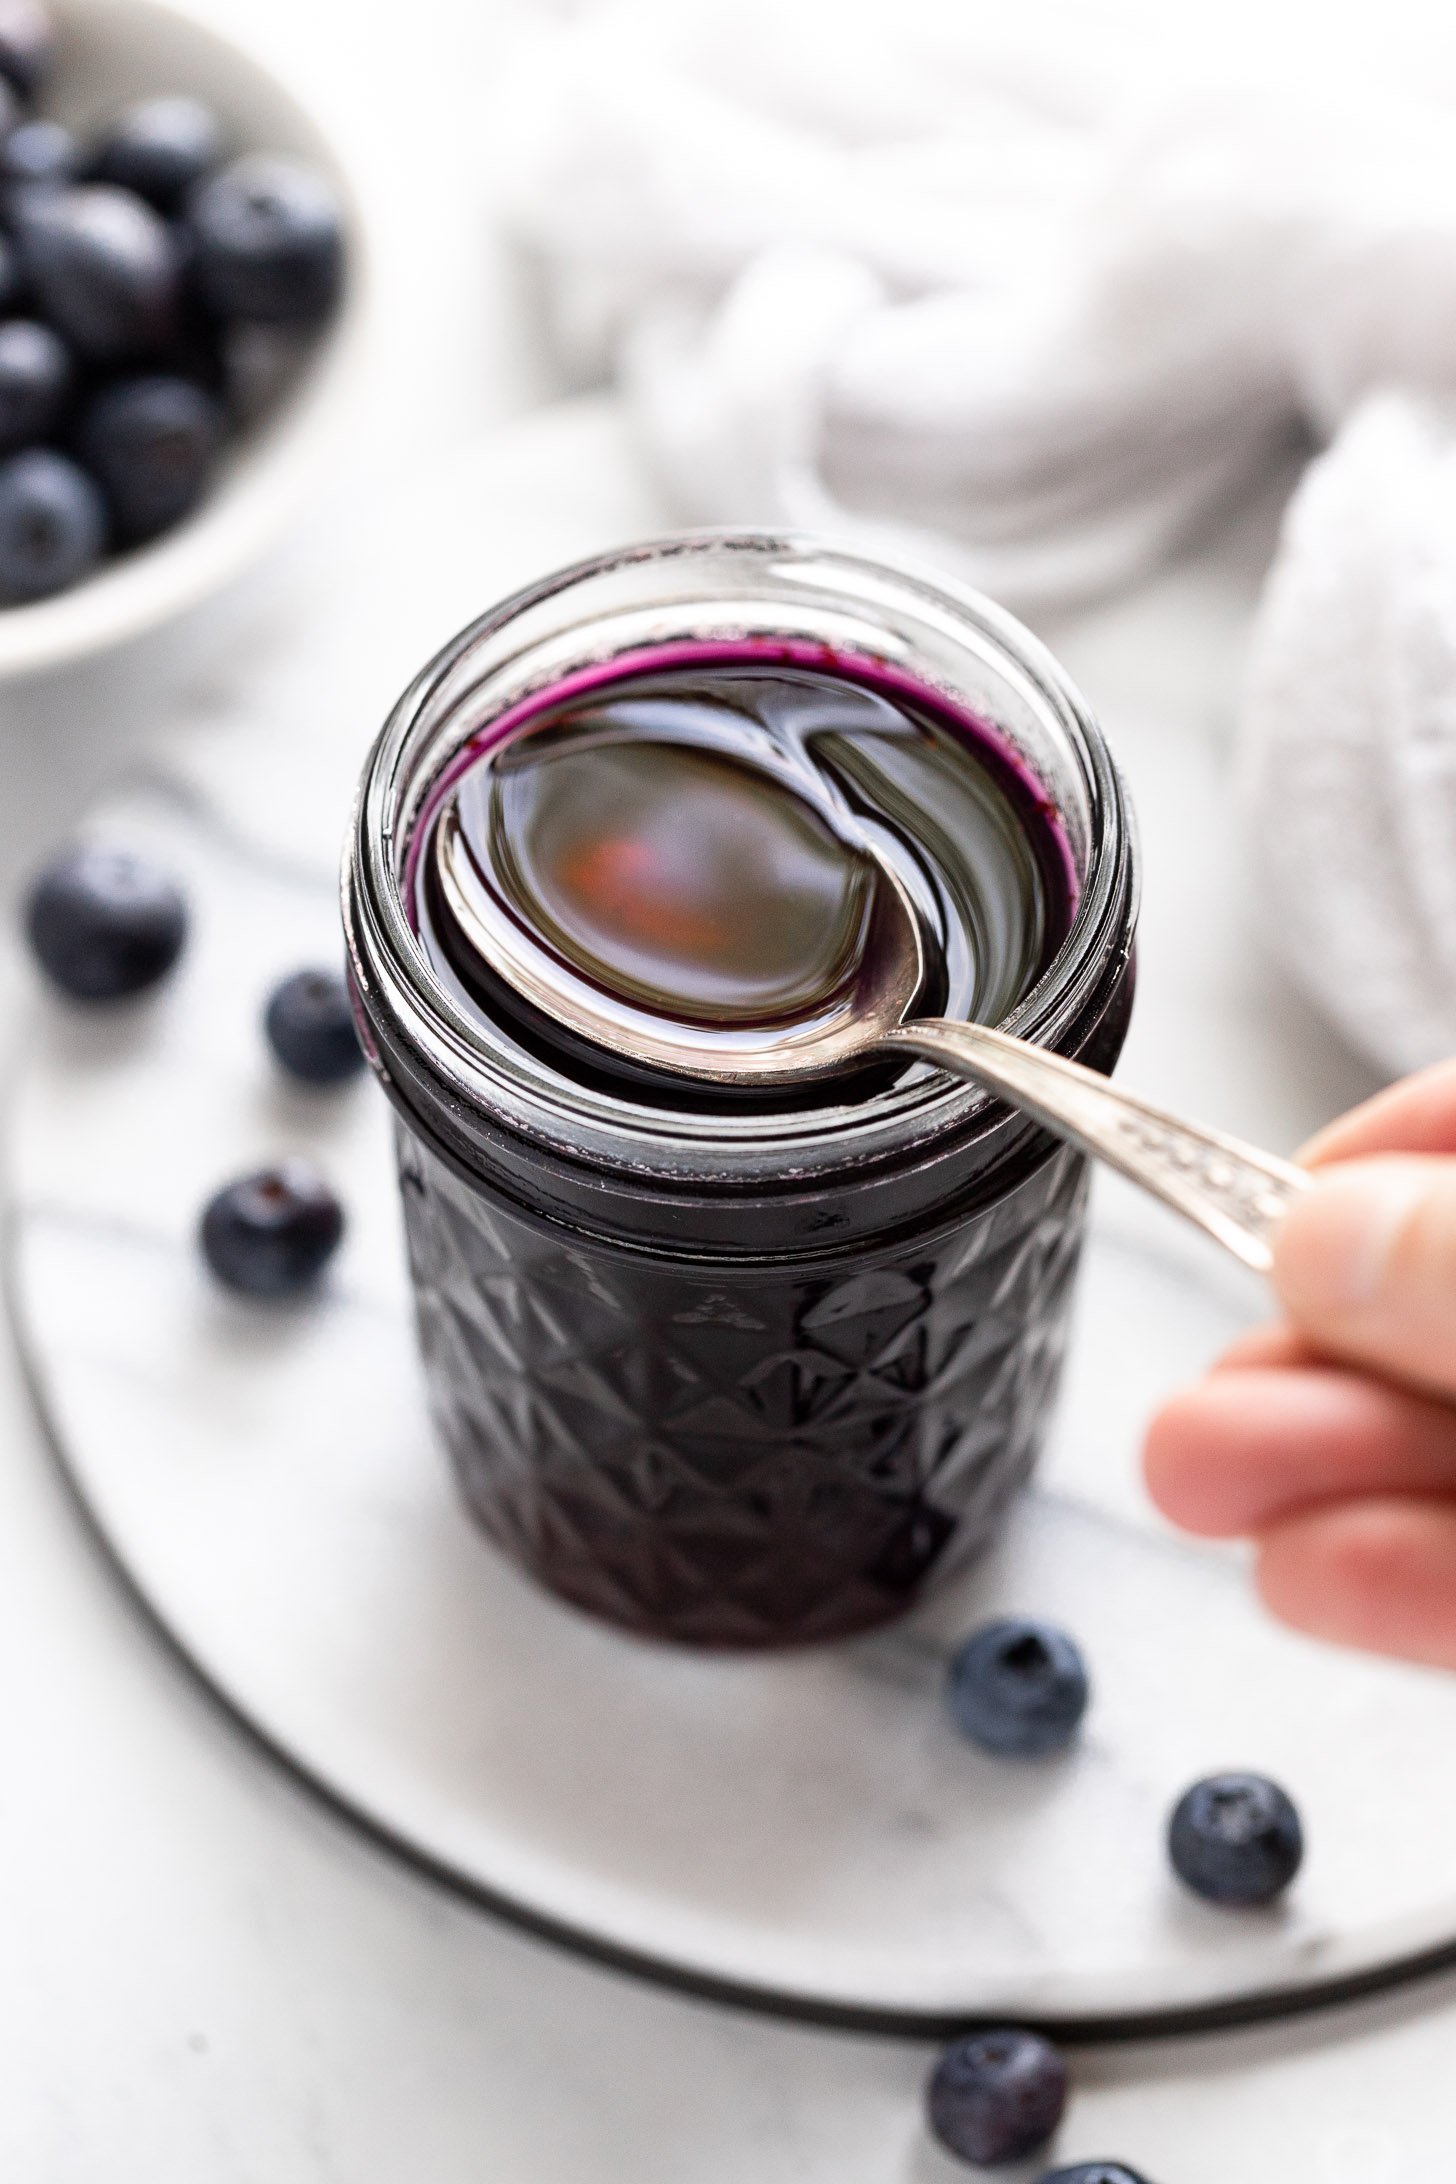 Spoon scooping blueberry syrup.